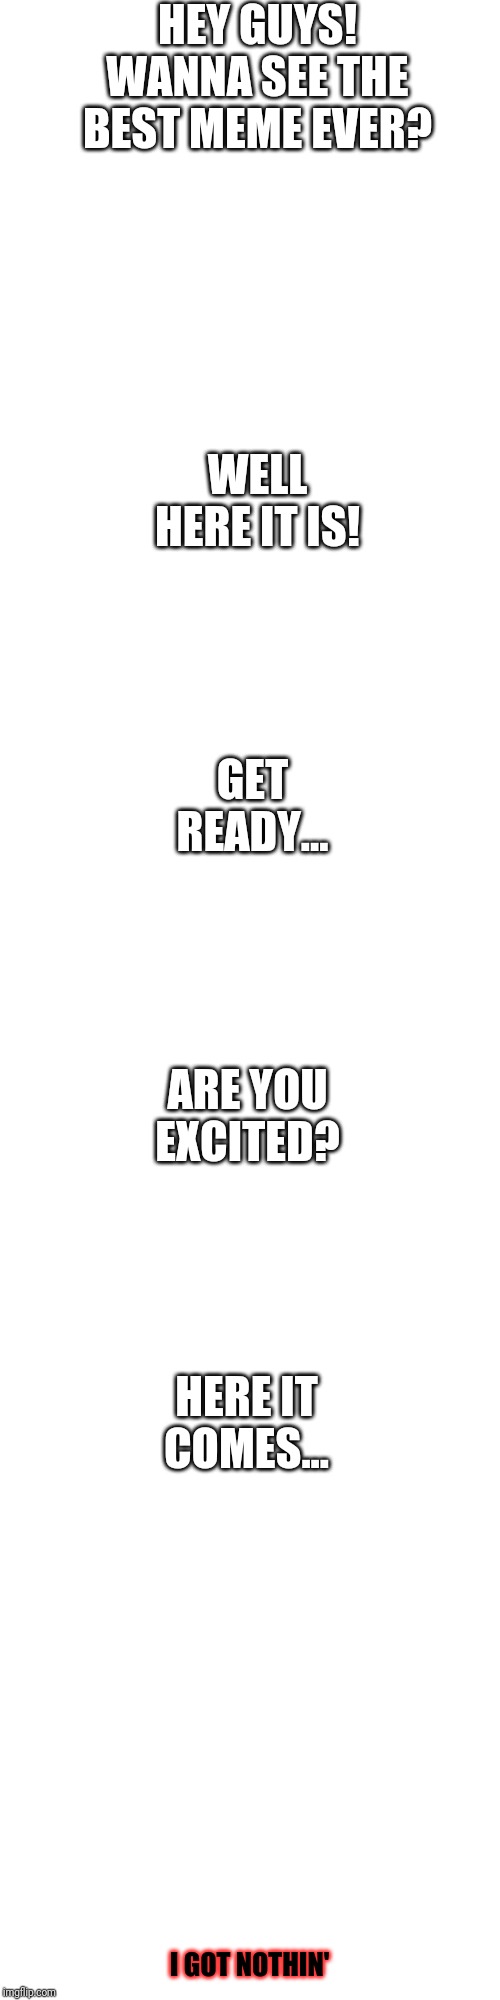 HEY GUYS! WANNA SEE THE BEST MEME EVER? WELL HERE IT IS! GET READY... ARE YOU EXCITED? HERE IT COMES... I GOT NOTHIN' | image tagged in memes,blank transparent square | made w/ Imgflip meme maker